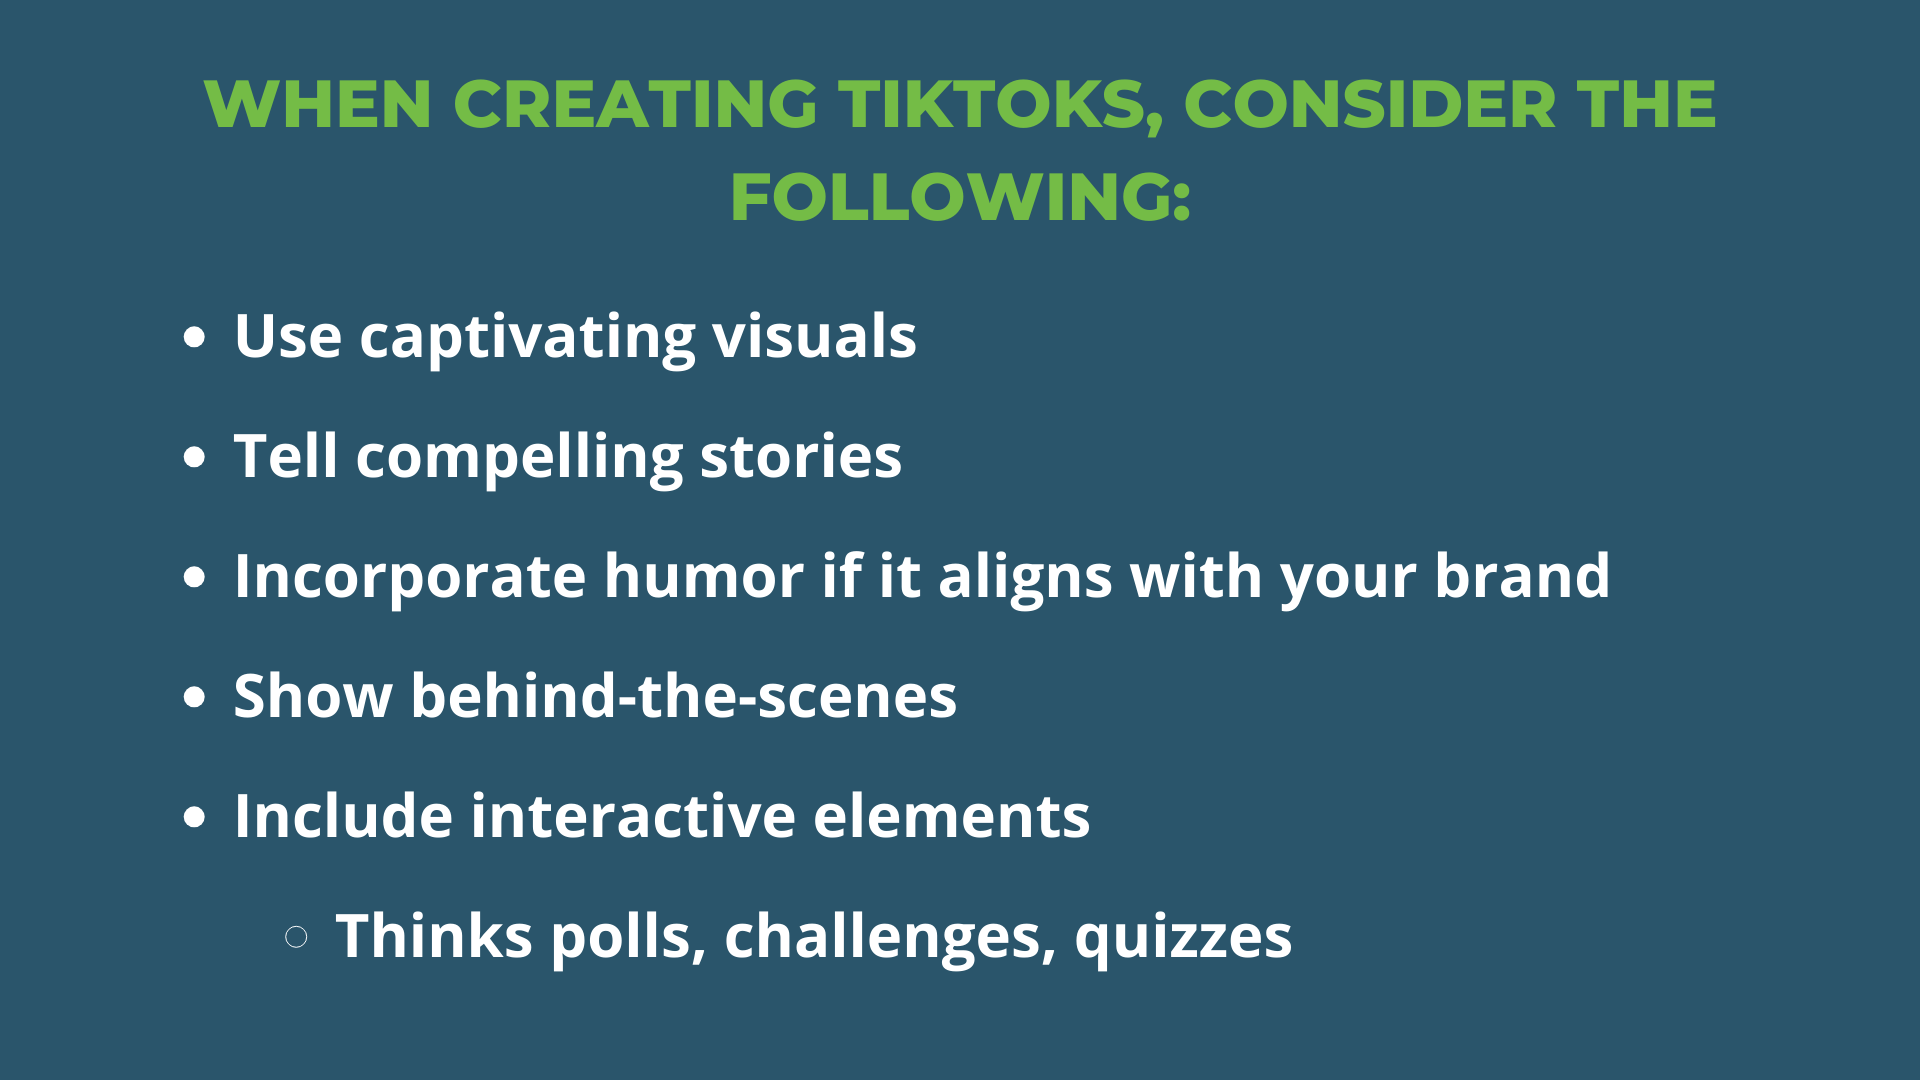 A list of what brand's should consider when creating TikToks